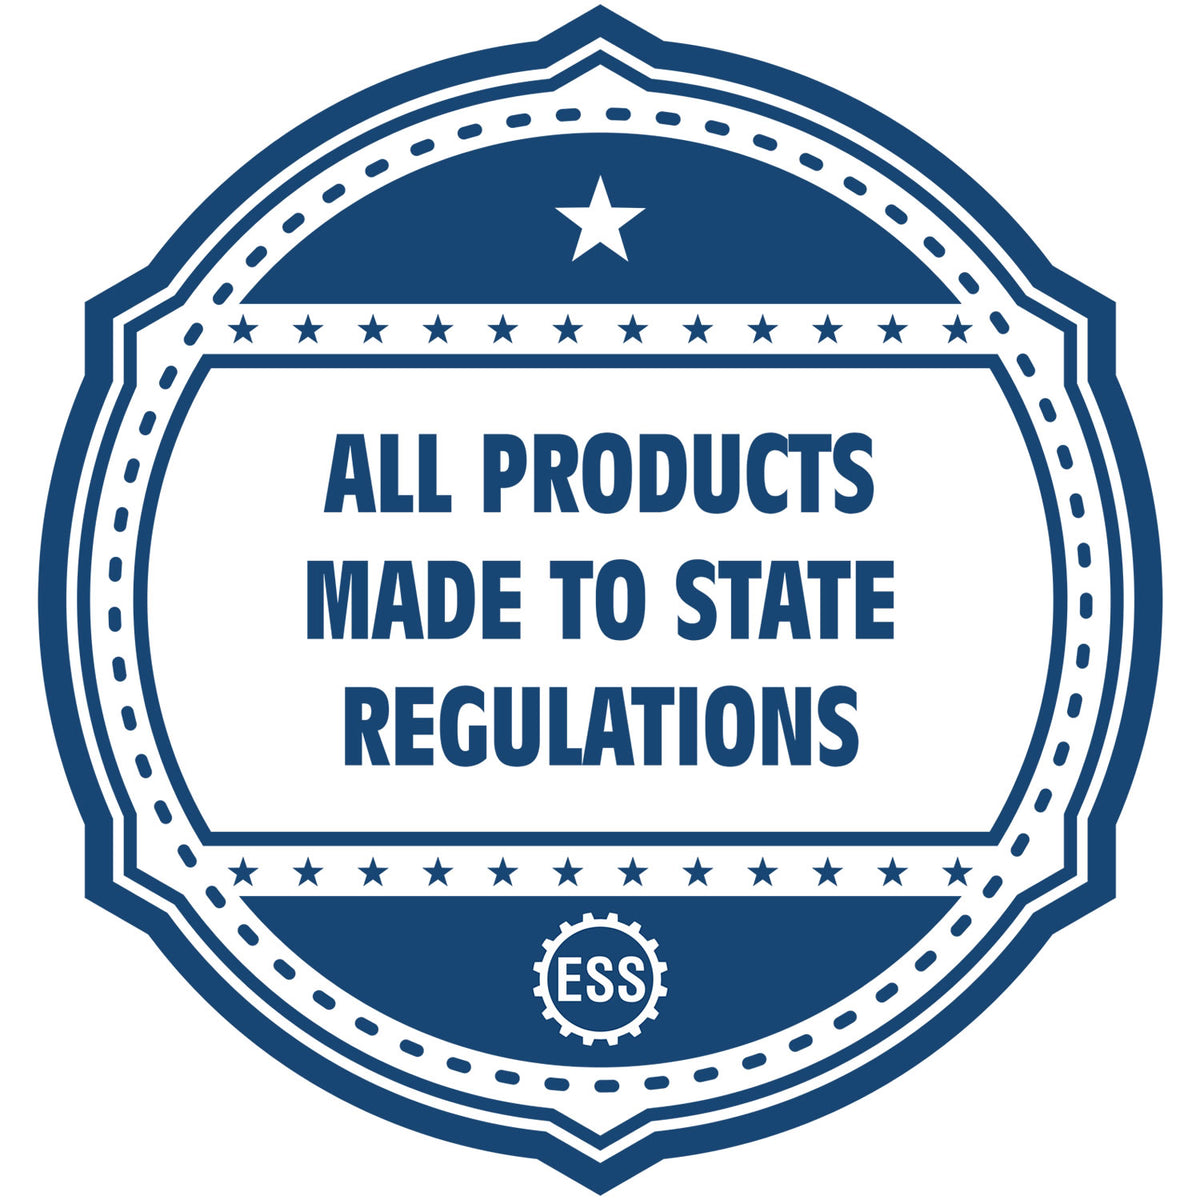 An icon or badge element for the Self-Inking Ohio PE Stamp showing that this product is made in compliance with state regulations.